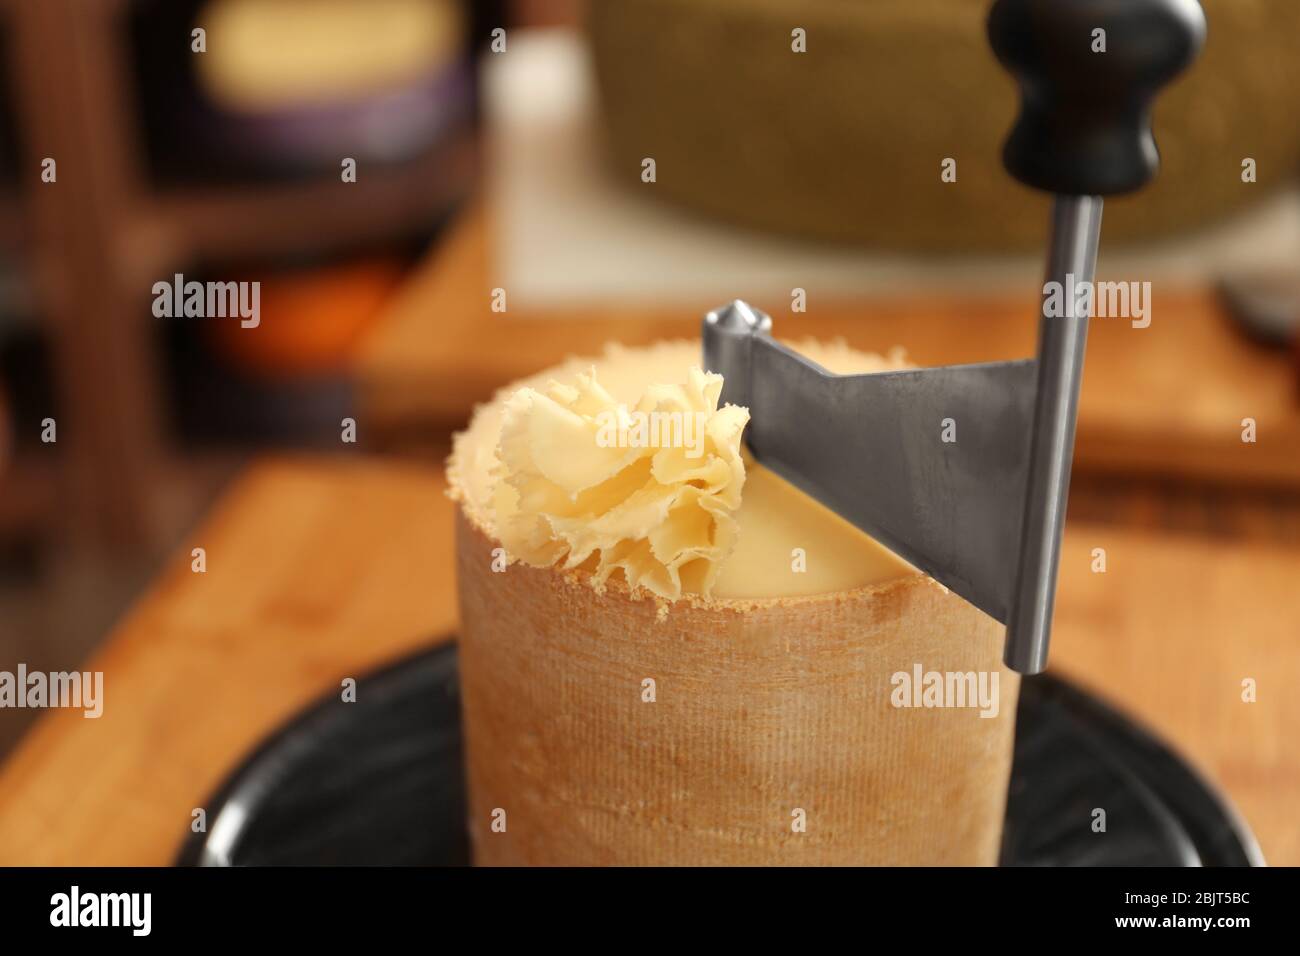 https://c8.alamy.com/comp/2BJT5BC/delicious-cheese-scraped-with-girolle-in-shop-closeup-2BJT5BC.jpg